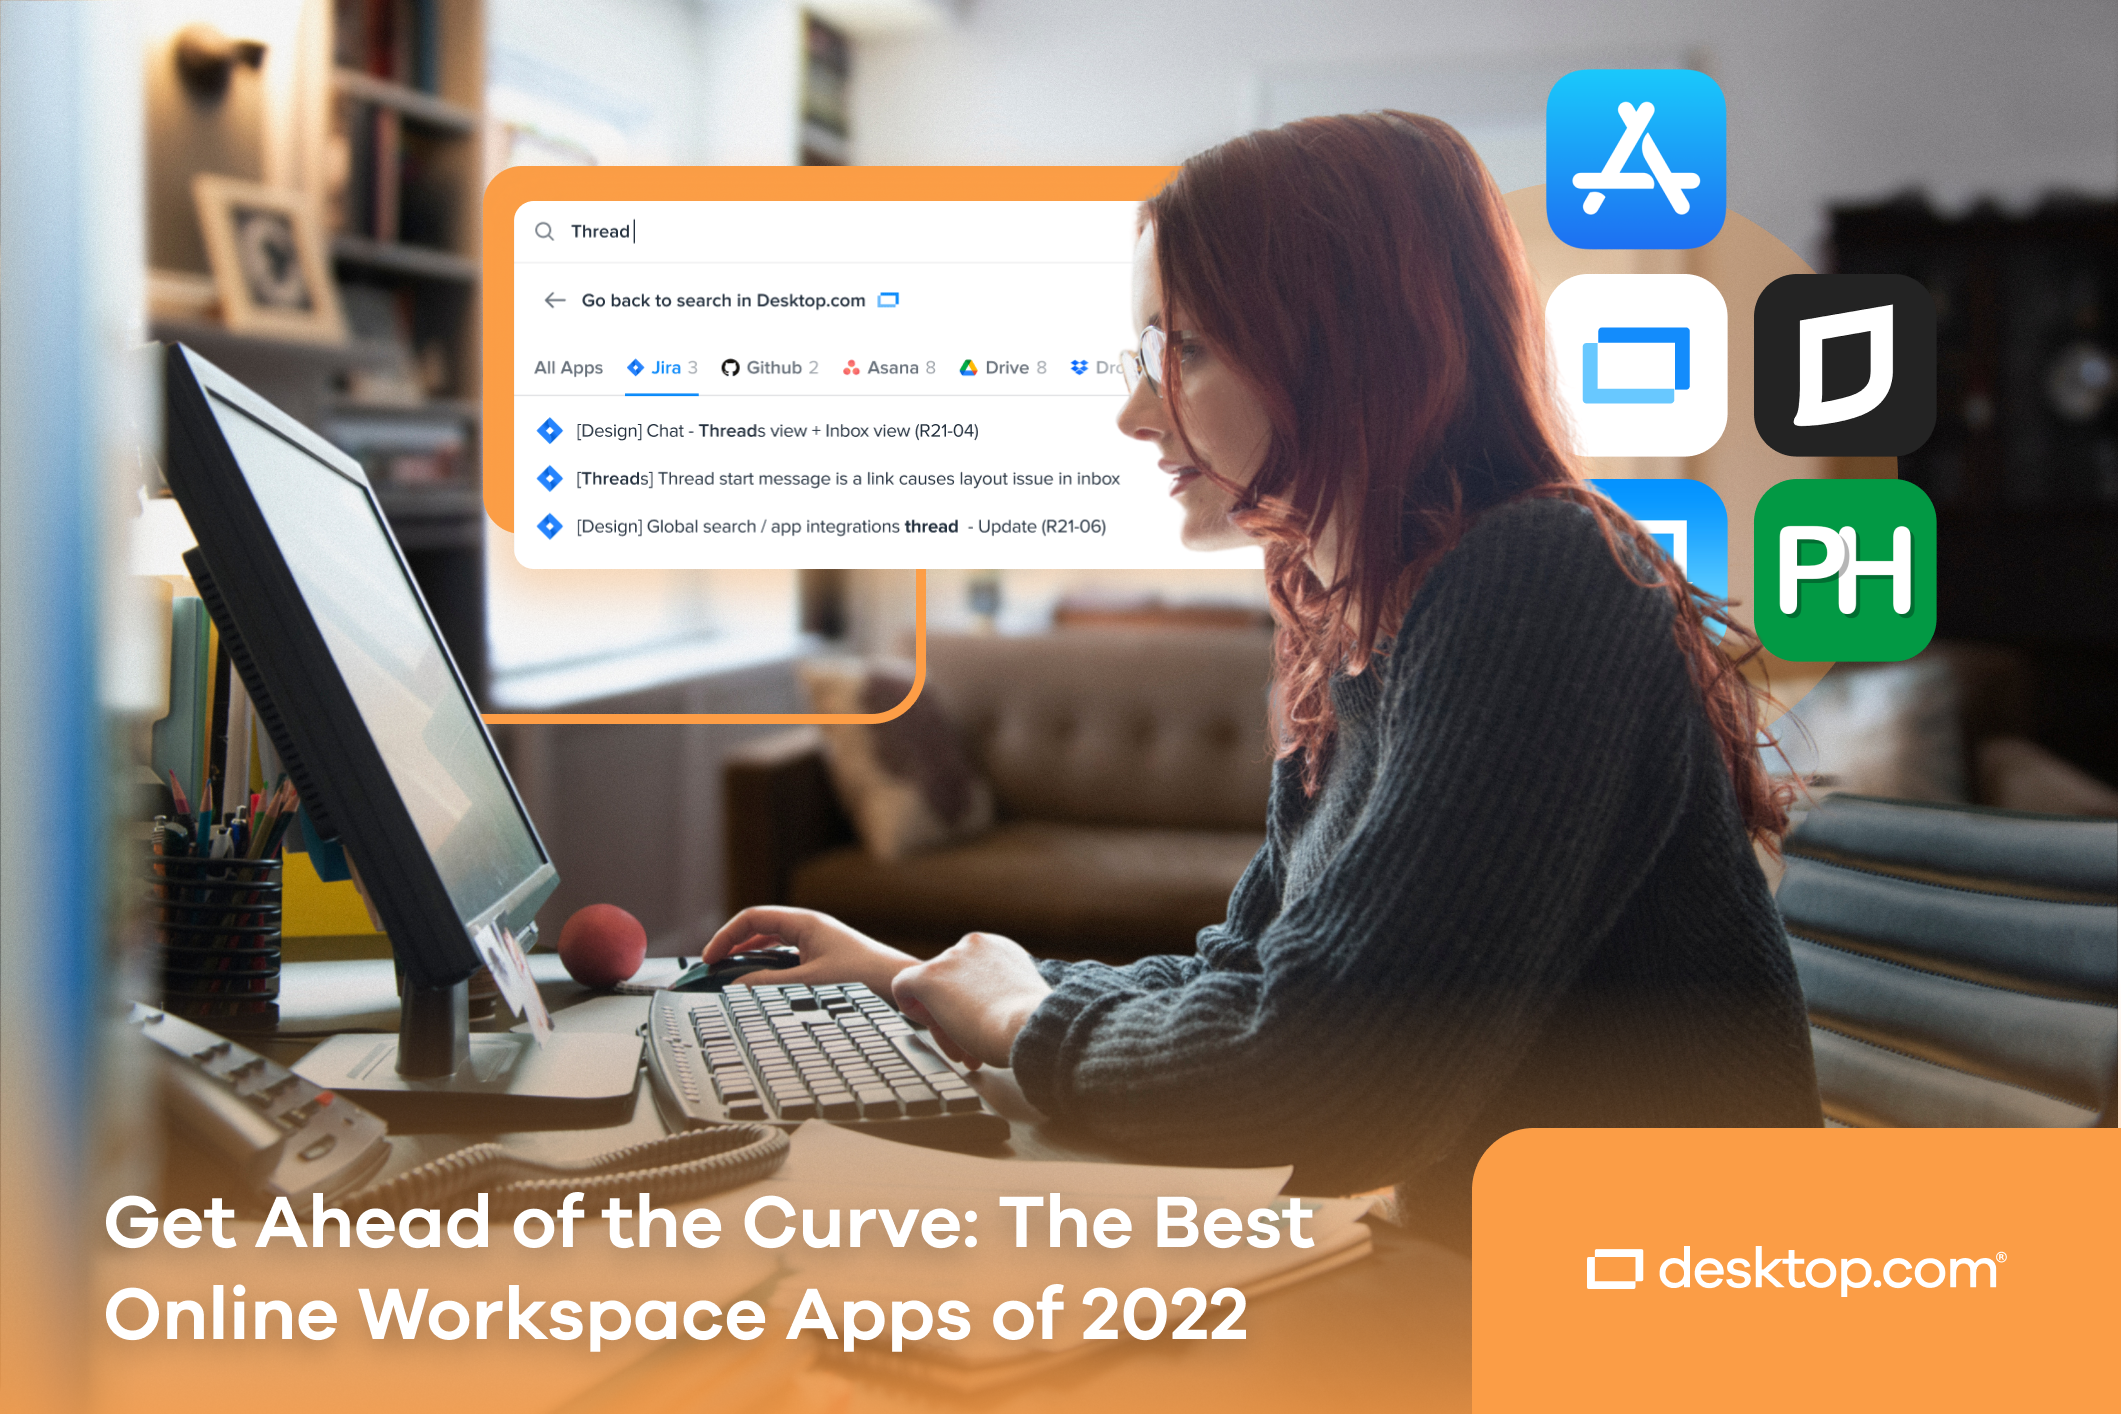 Get Ahead of the Curve: The Best Online Workspace Apps of 2022